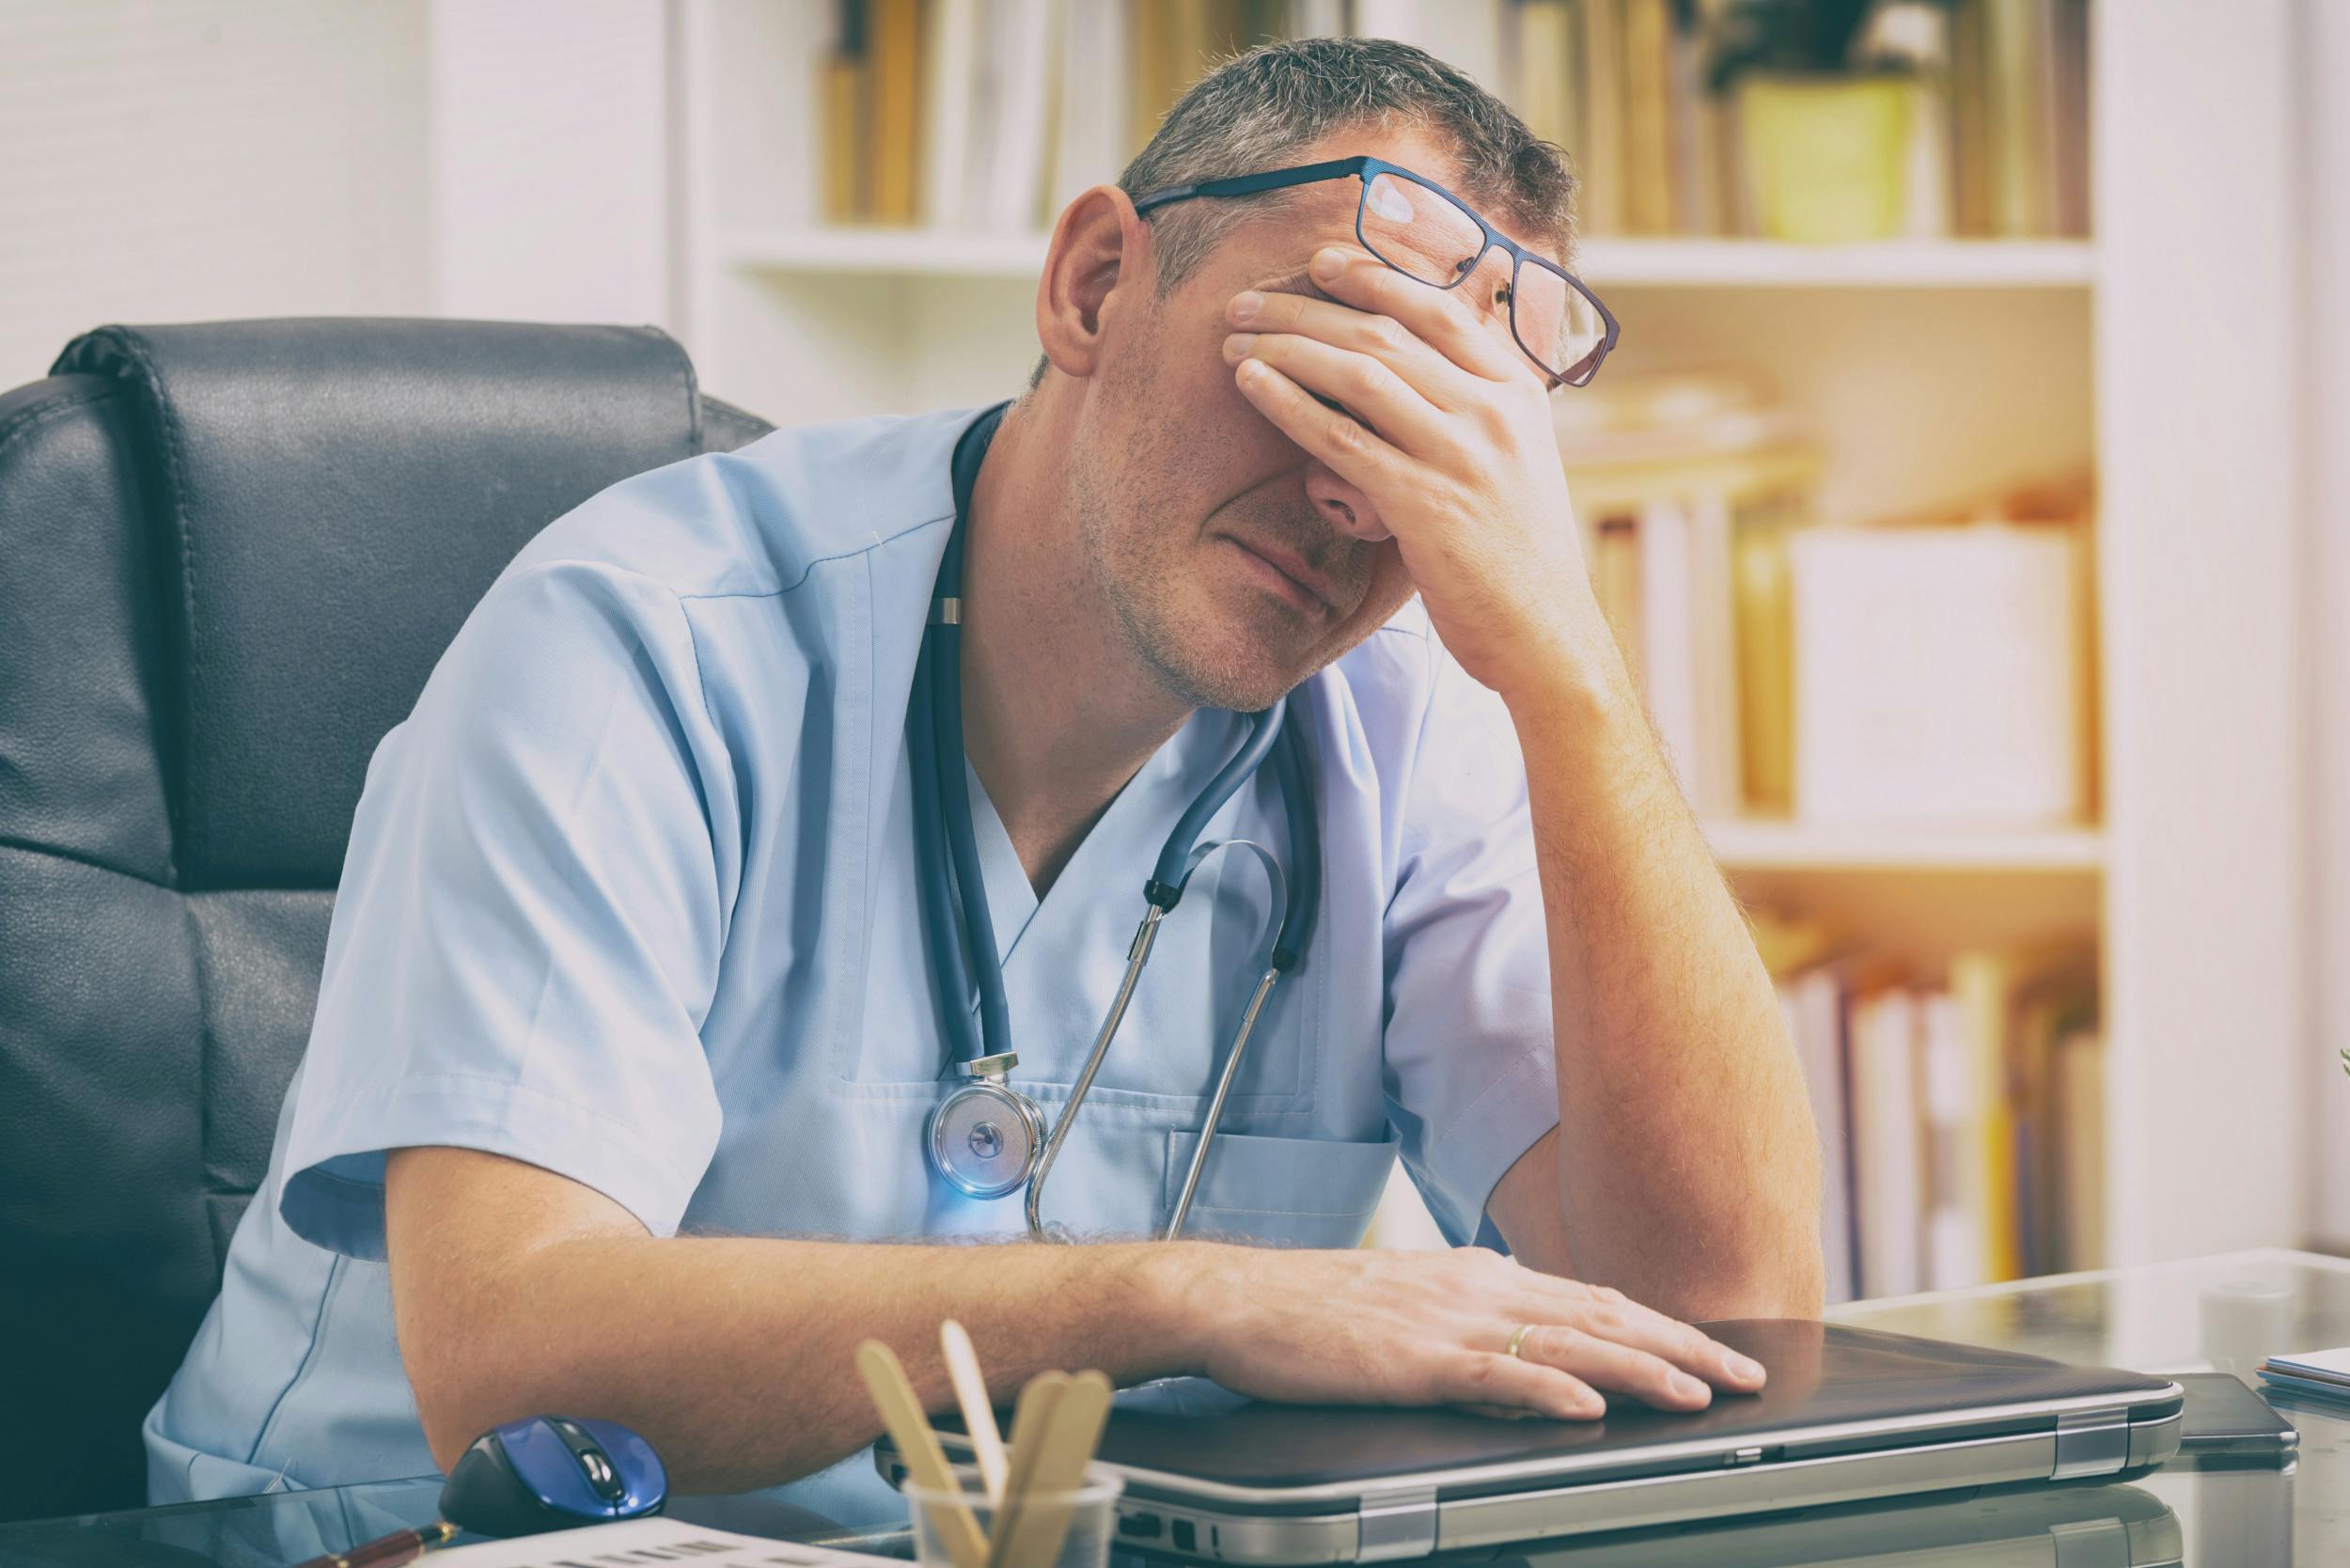 How Burnout Is Impacting Even Temporary Staffing Across Healthcare